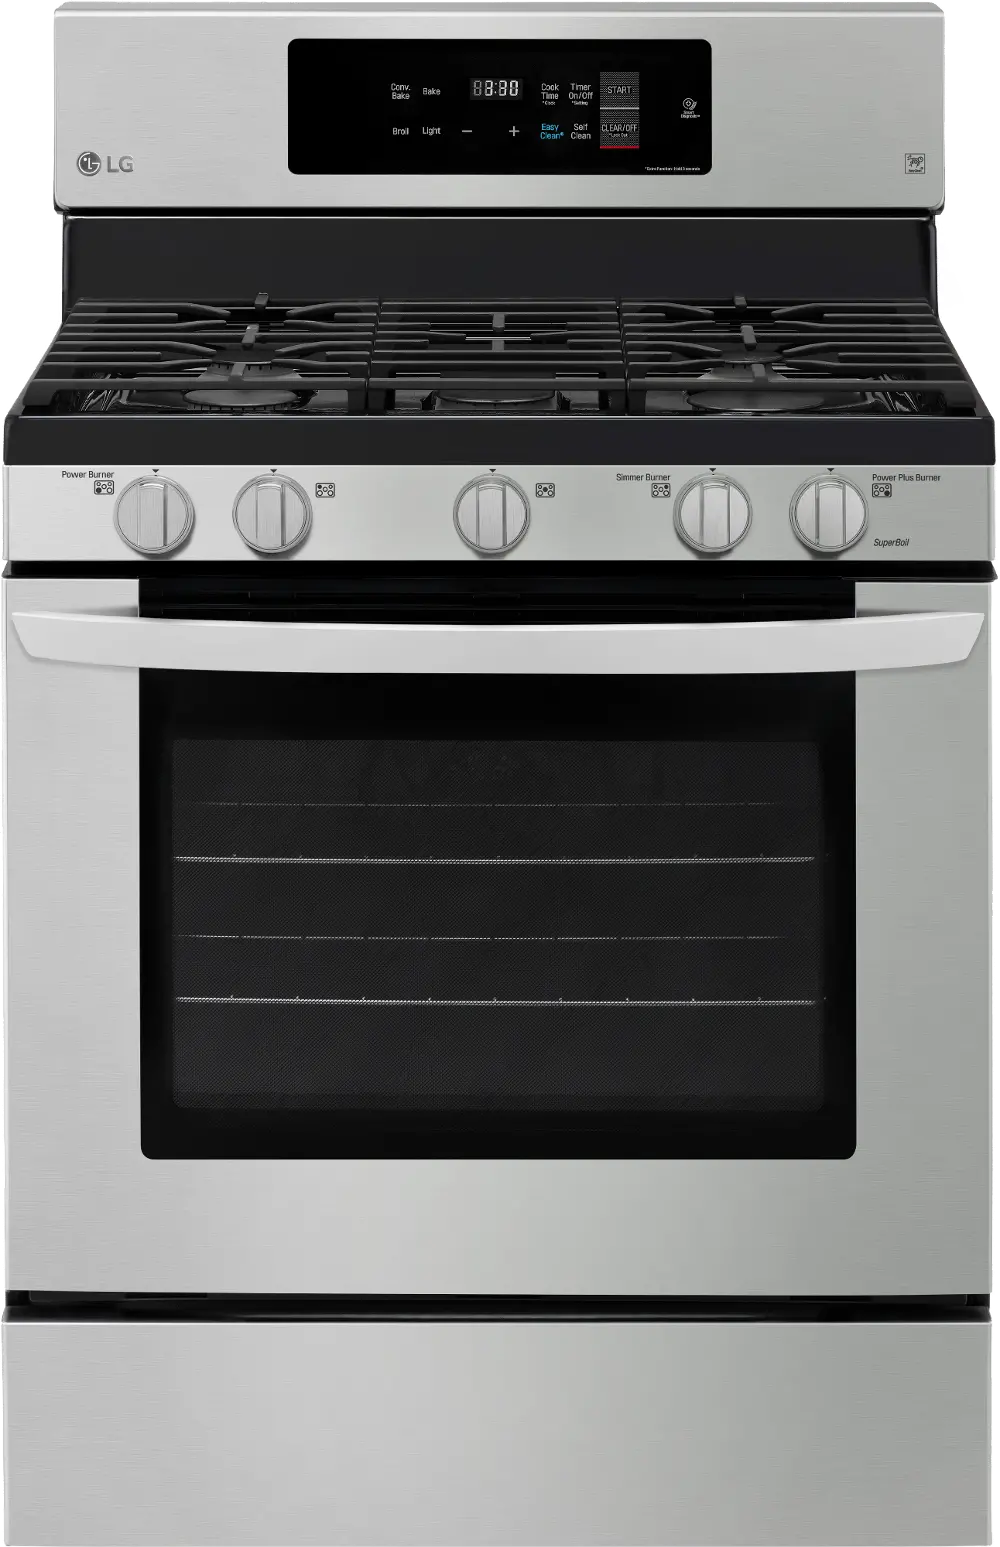 LRG3194ST LG 30 Inch Gas Range with Convection Oven - 5.4 cu. ft. Stainless Steel-1